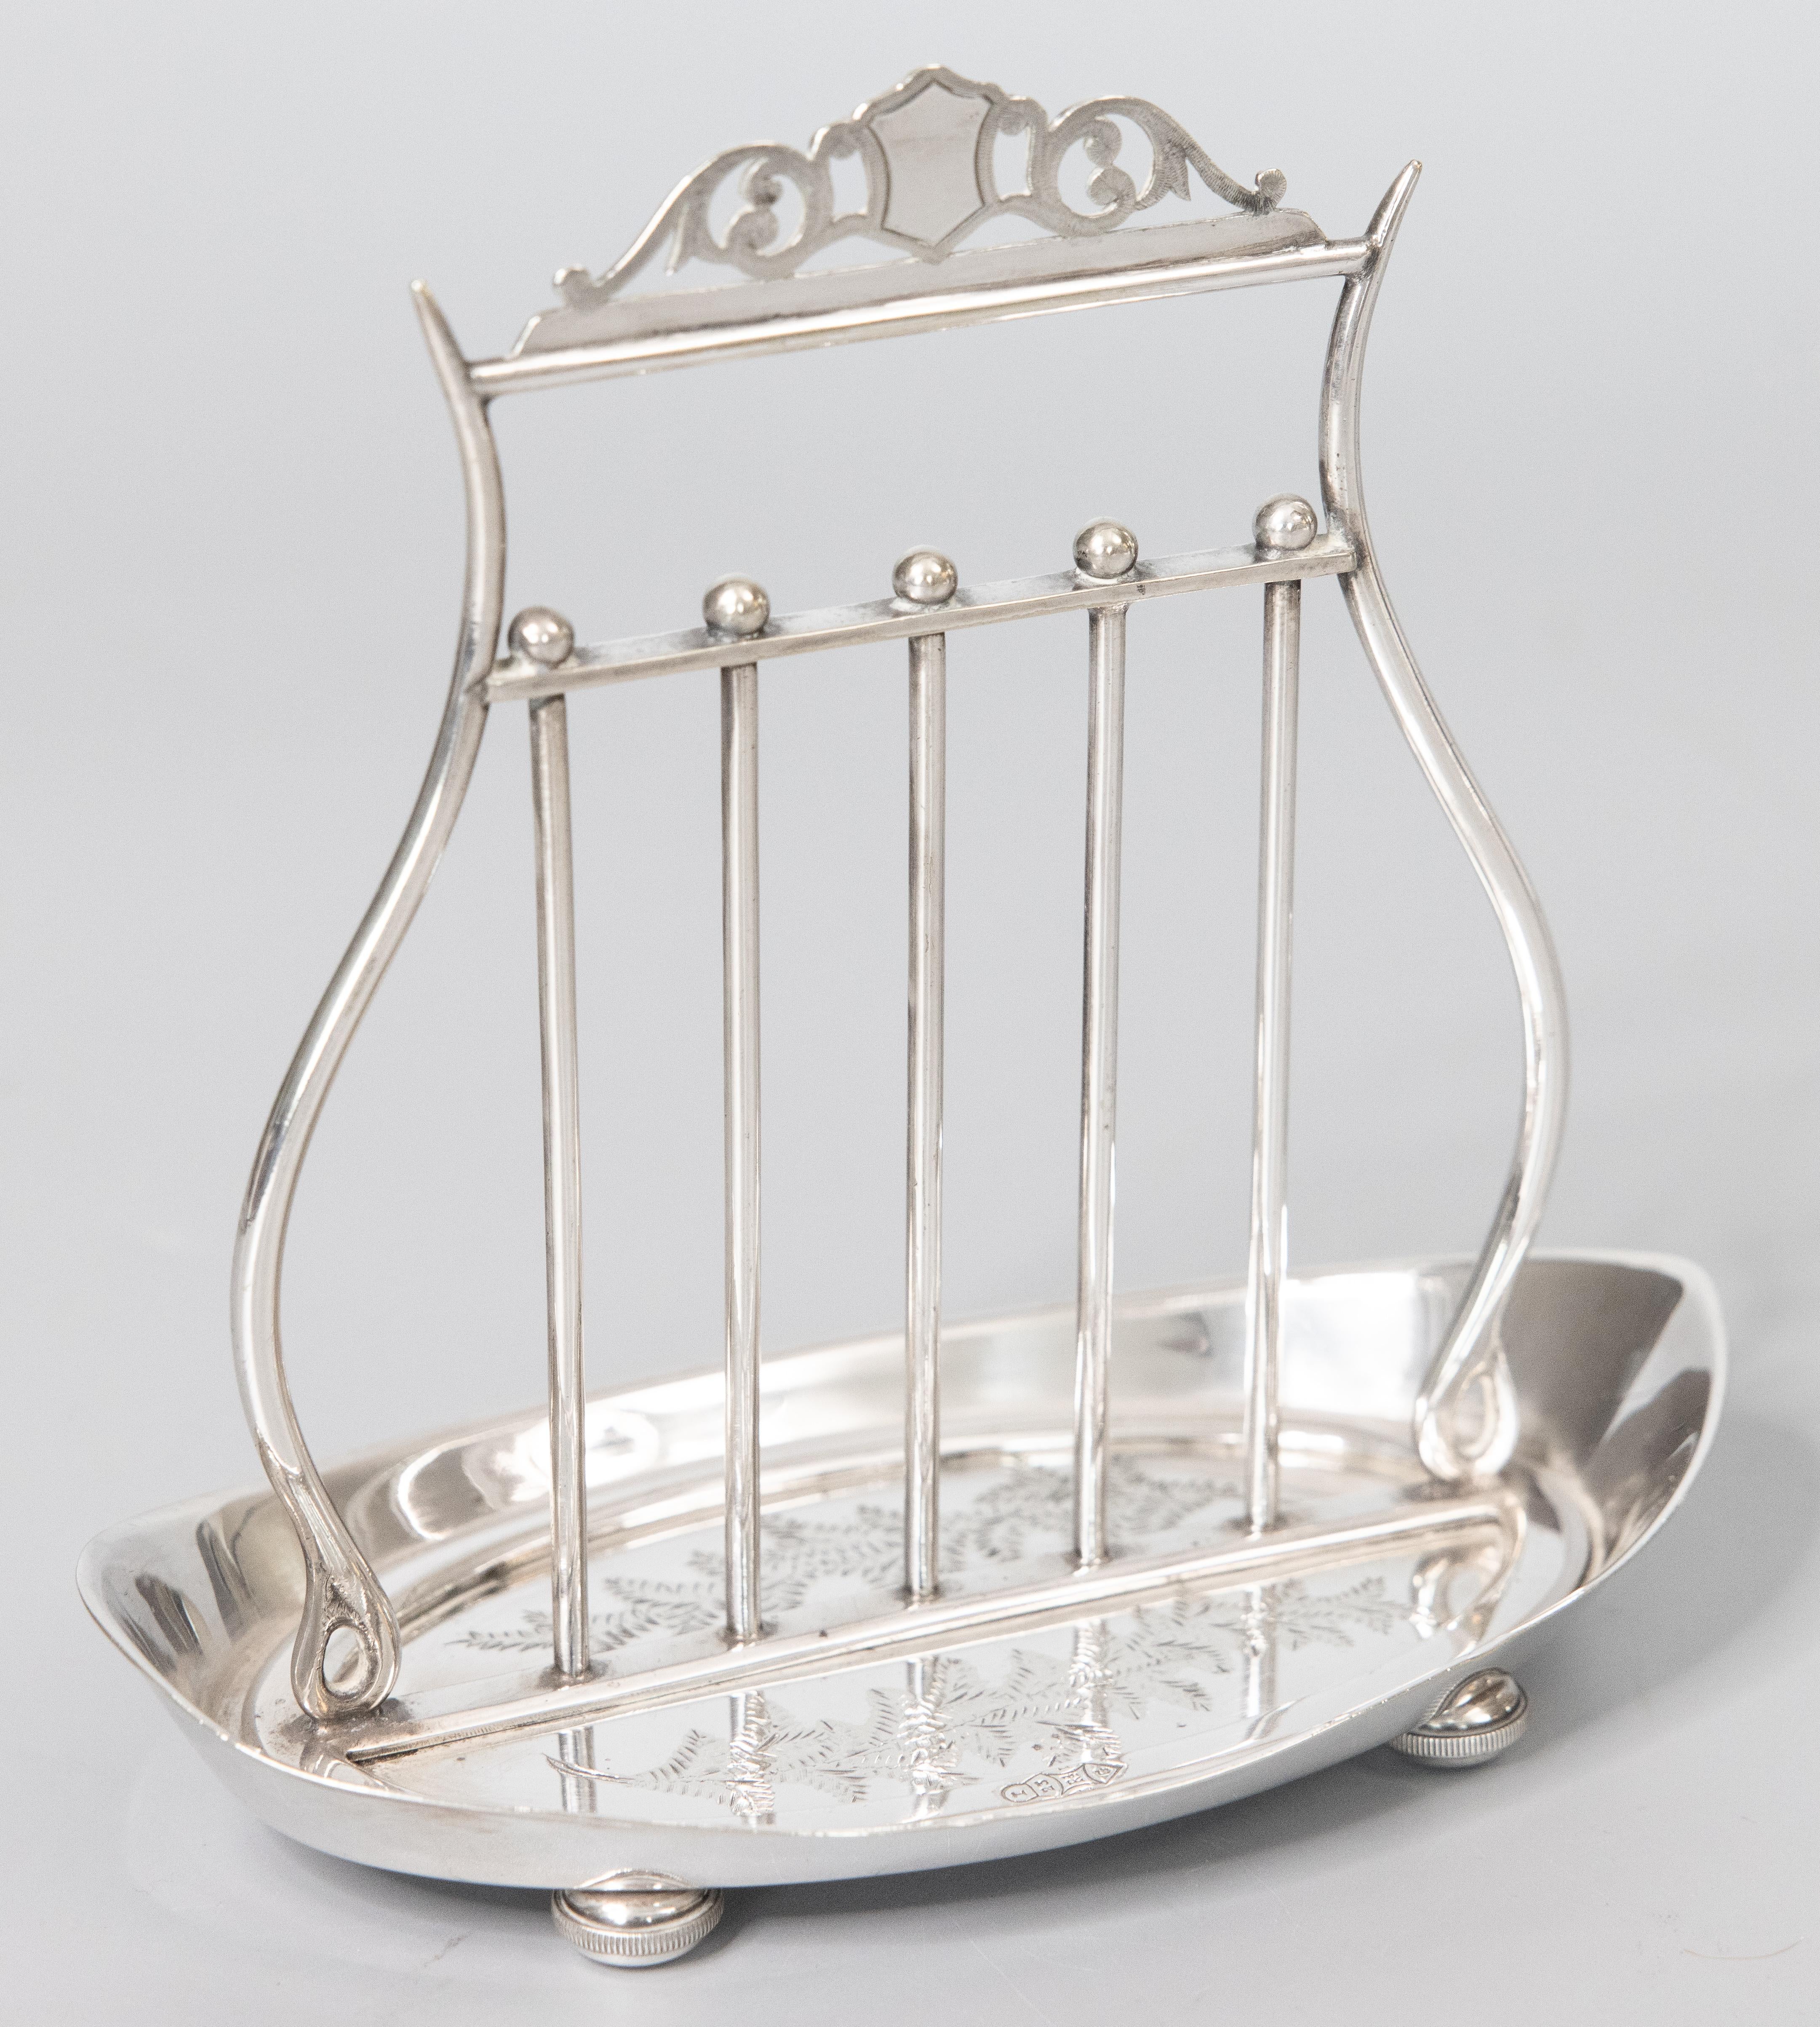 A lovely antique English silverplate lyre shaped letter holder by Thomas Bradbury of Sheffield, dated 1872. Hallmarks on base. This beautiful letter rack has a Neoclassical design with an elegant lyre shape, etched foliate decoration, and charming